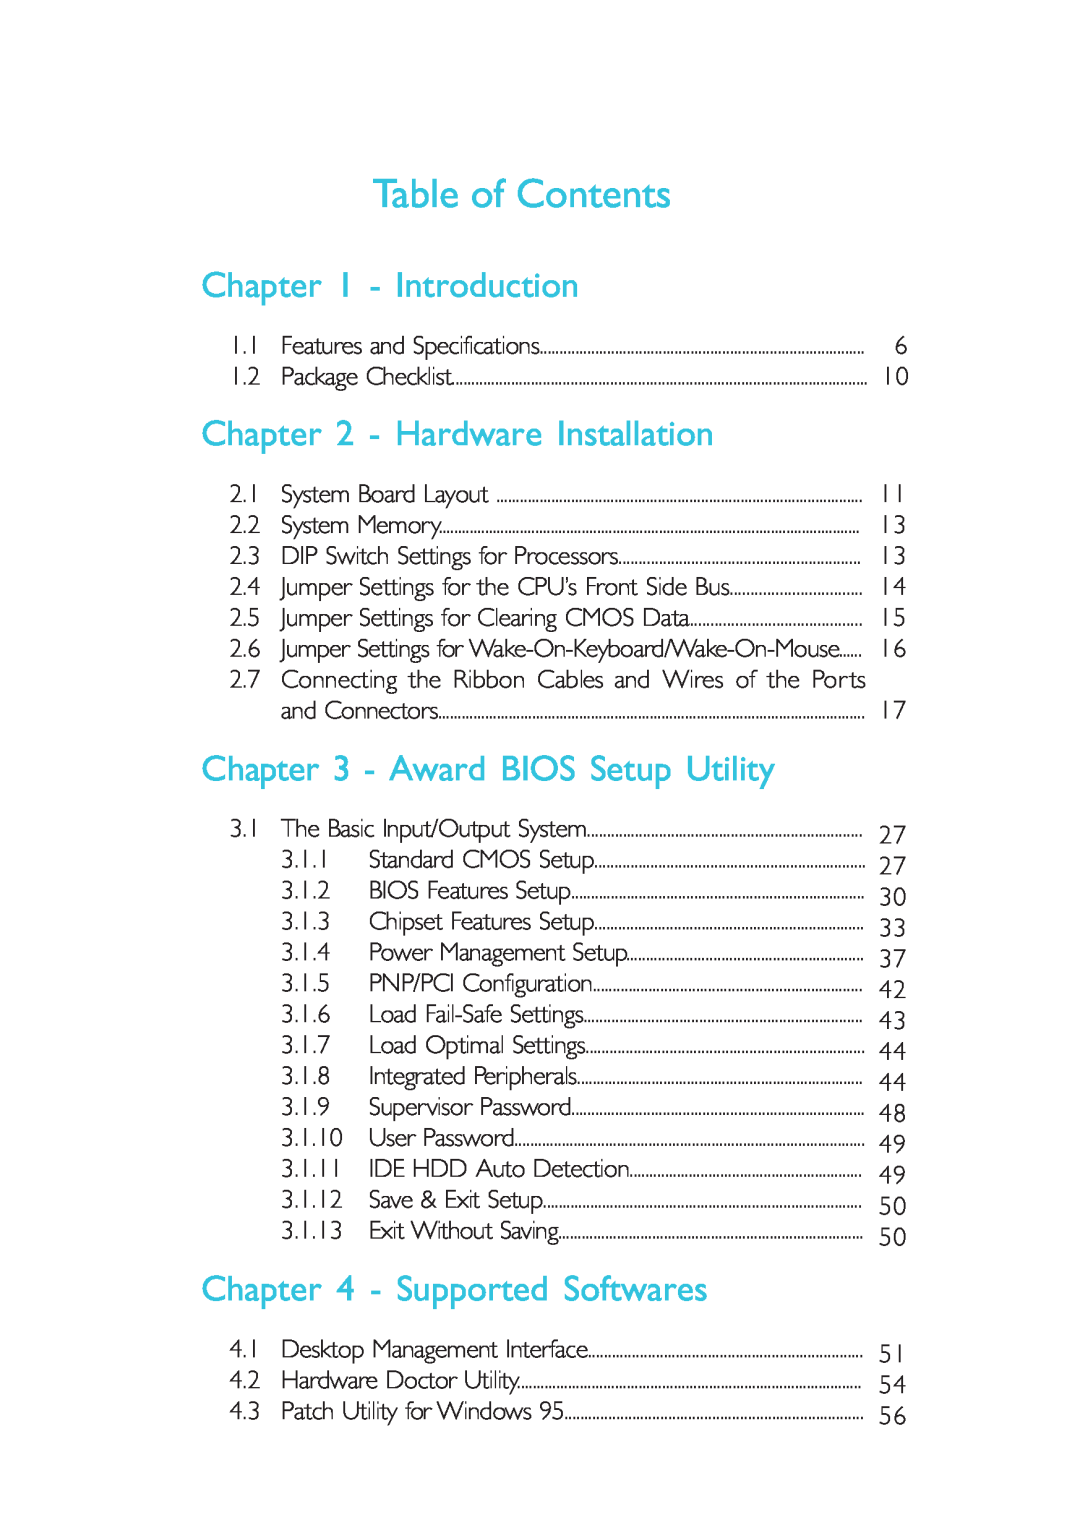 Intel CB60-BX manual Table of Contents, Introduction, Hardware Installation, Award BIOS Setup Utility, Supported Softwares 